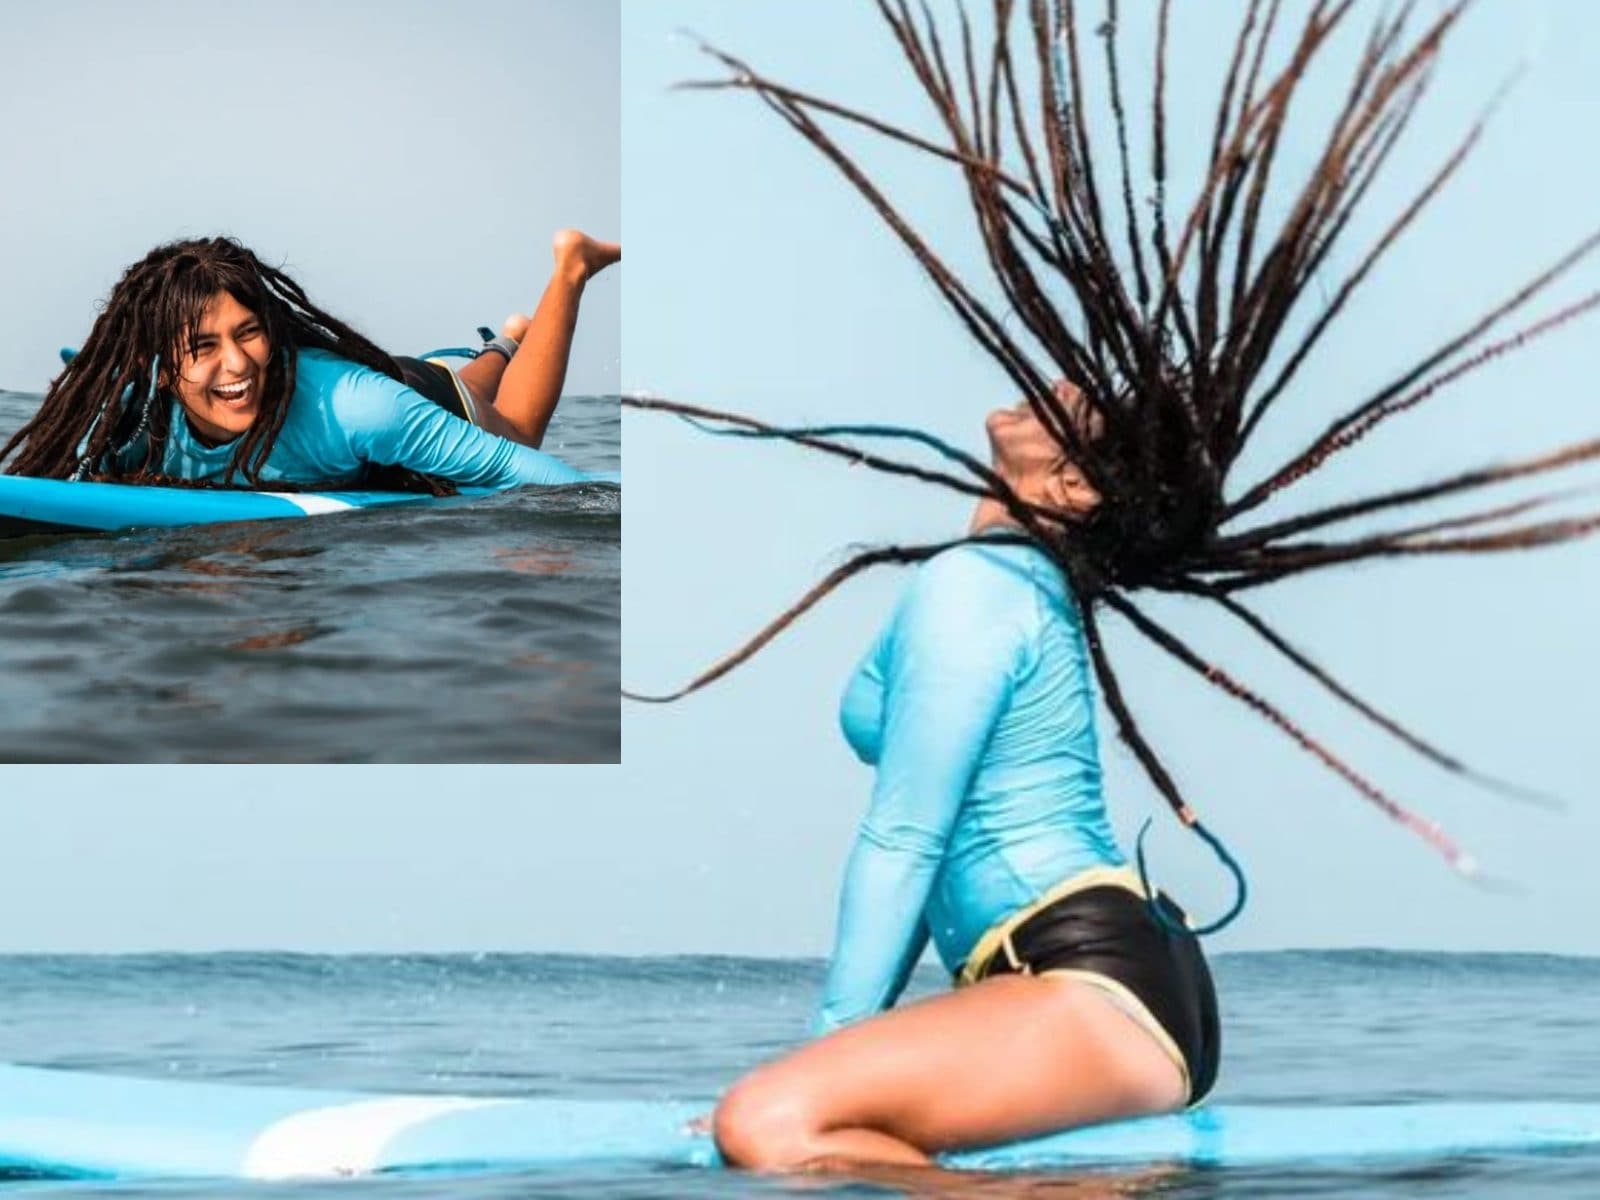 1600px x 1200px - TMKOC Fame Nidhi Bhanushali Does Sexy Hair Flip While Surfing in  Breathtaking Shots; See Pics - News18